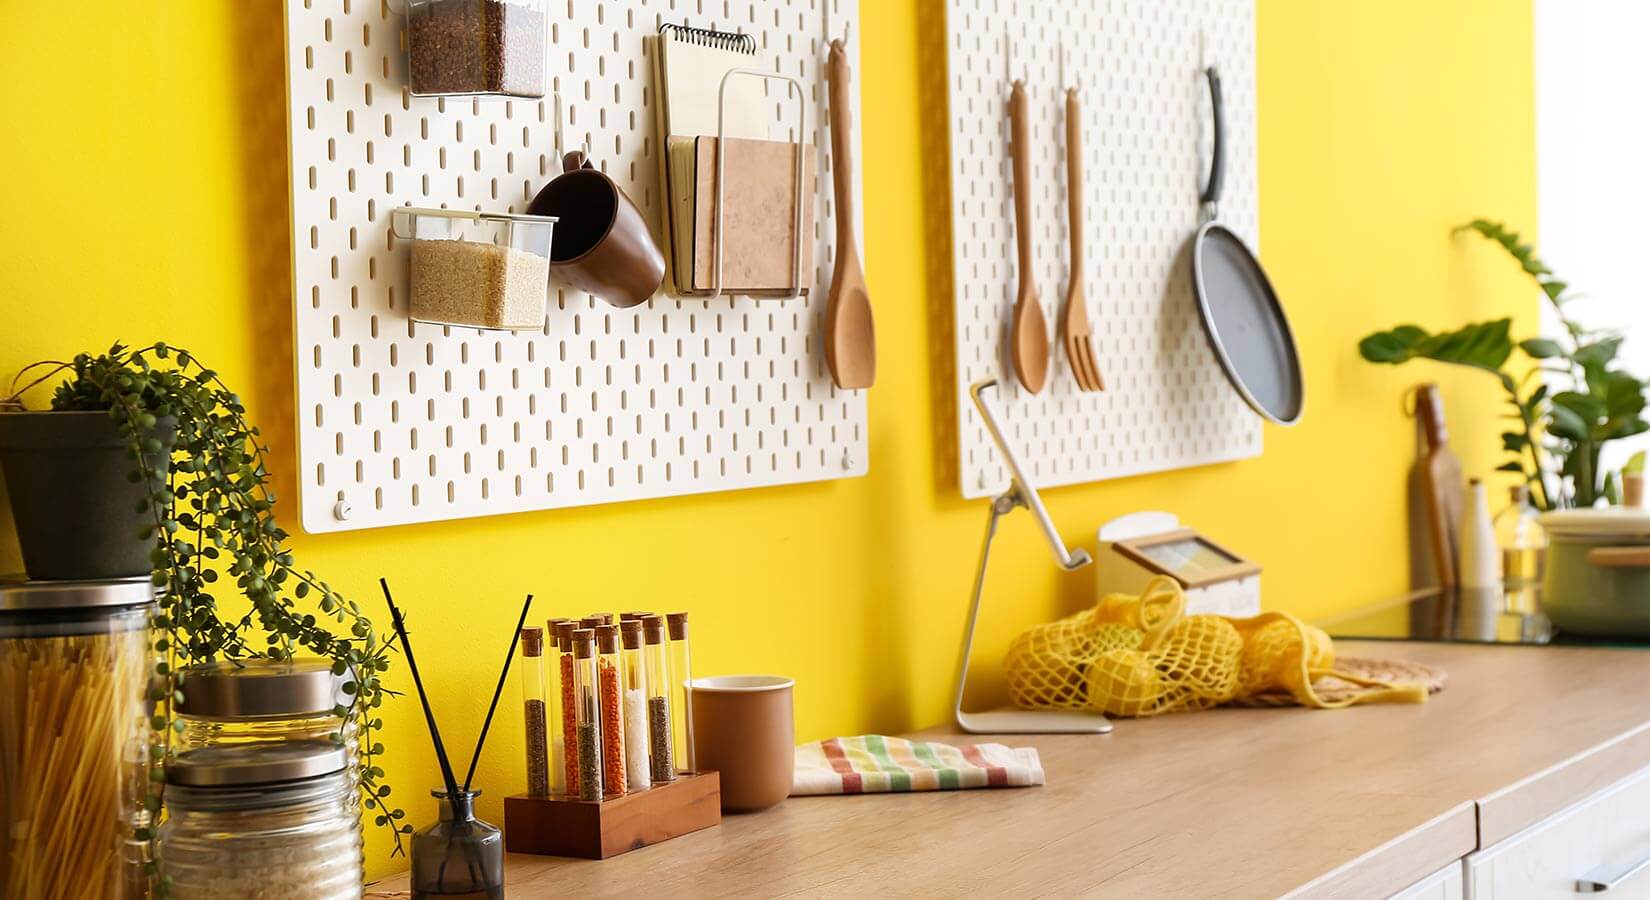 Cooking utensils, pan, and mug hanging from white pegboard against bright yellow kitchen wall.